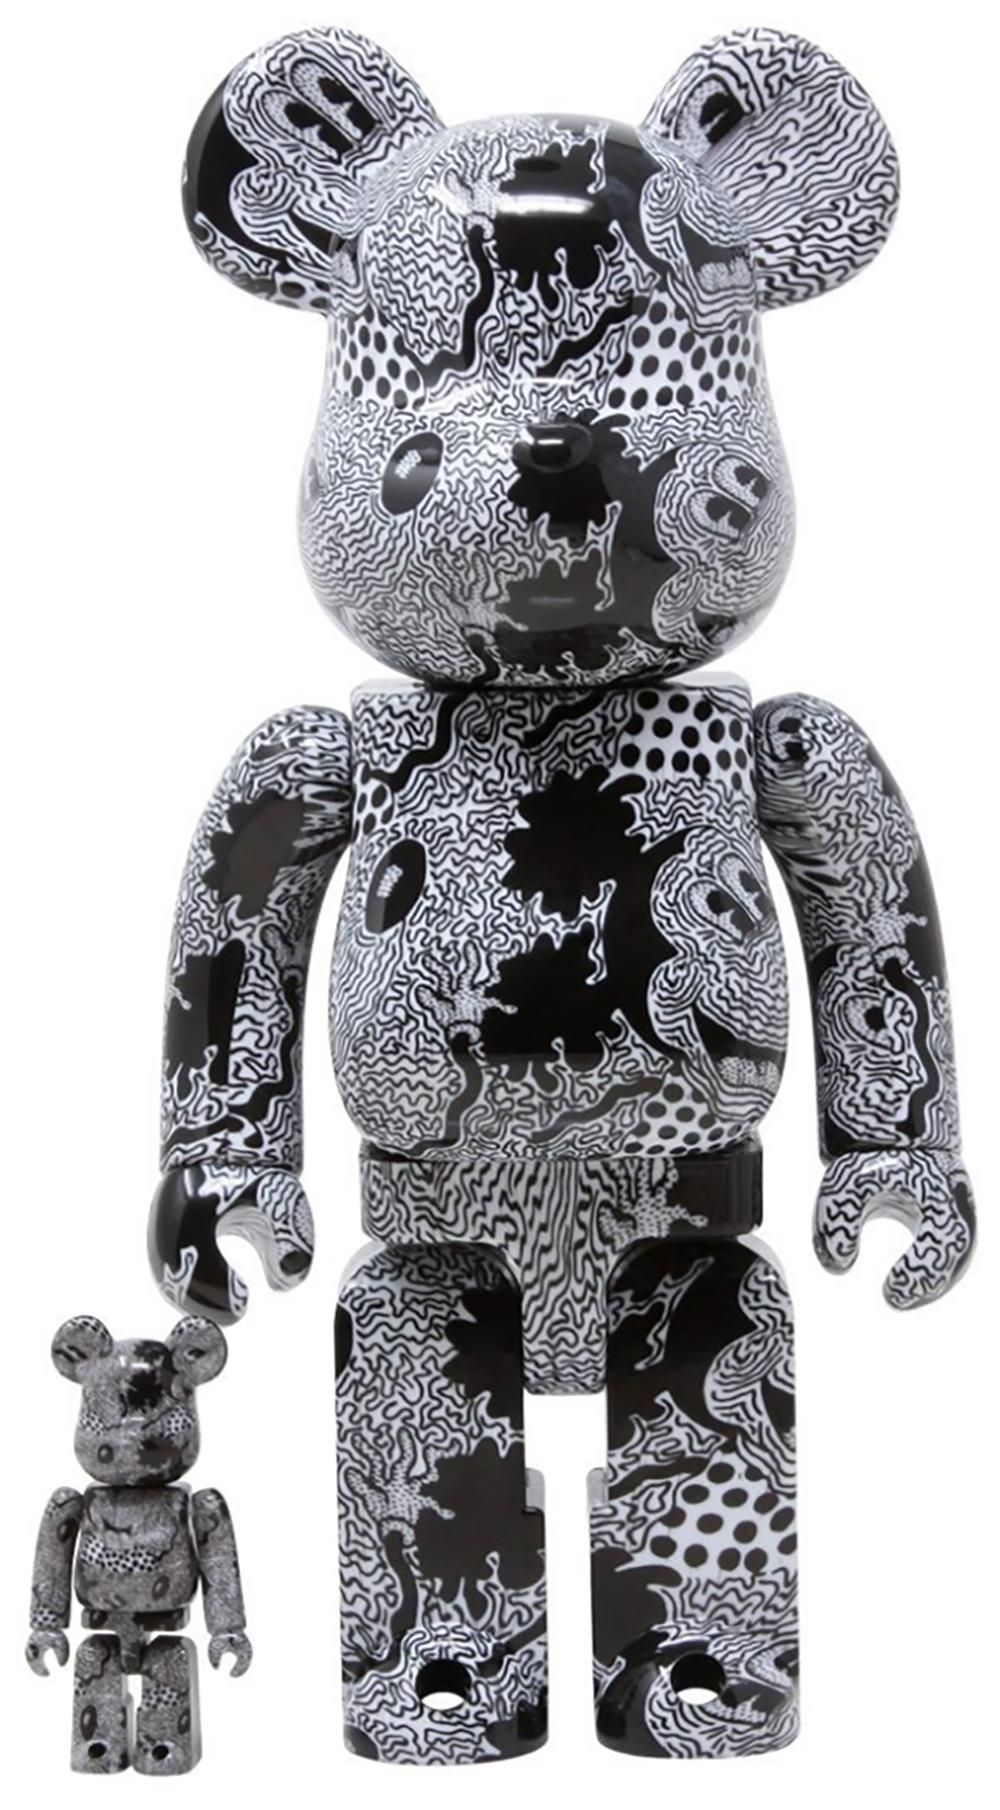 Keith Haring Bearbrick 400% Begleiter (Haring Mickey Mouse BE@RBRICK)